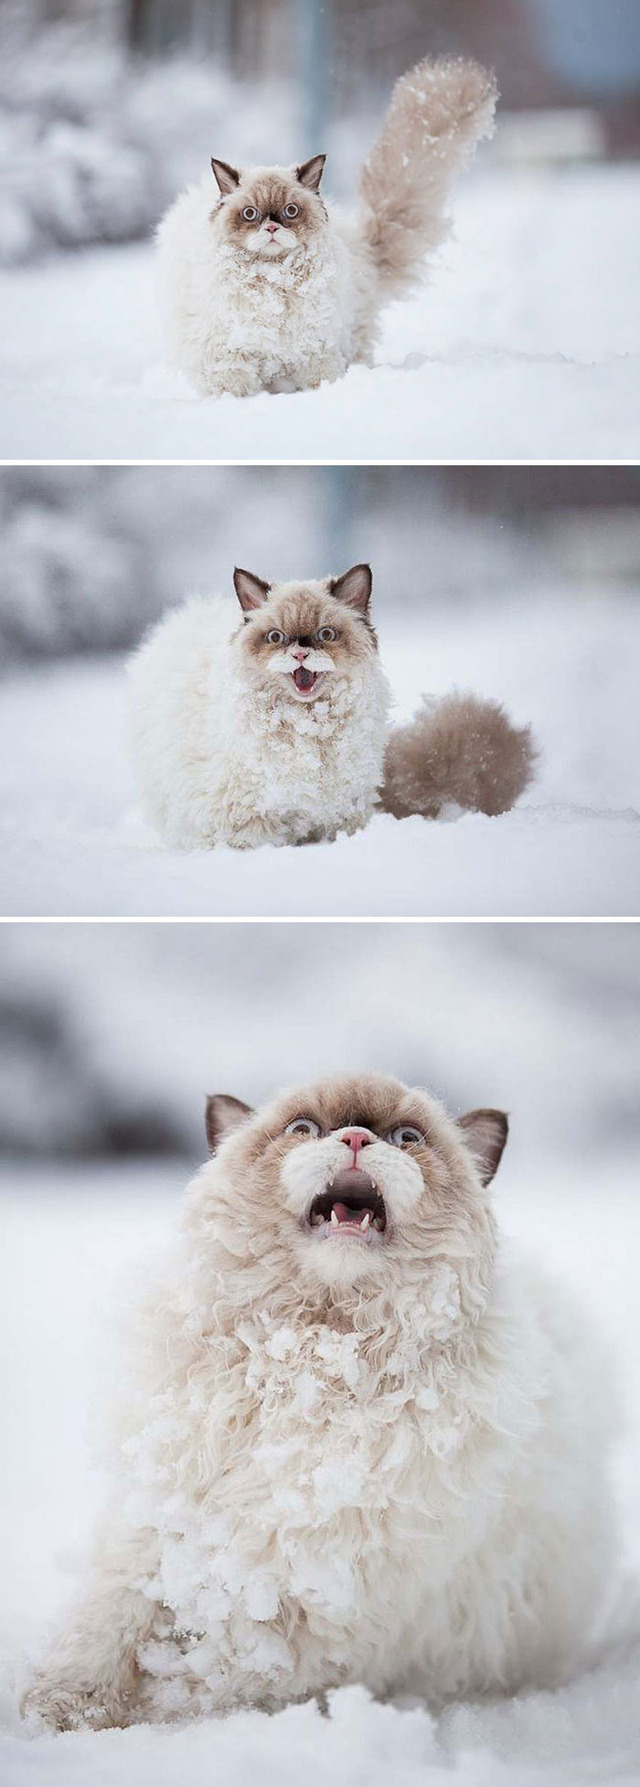 funny-animals-first-snow-cats-dogs-101-5a548f9fdbc33__700